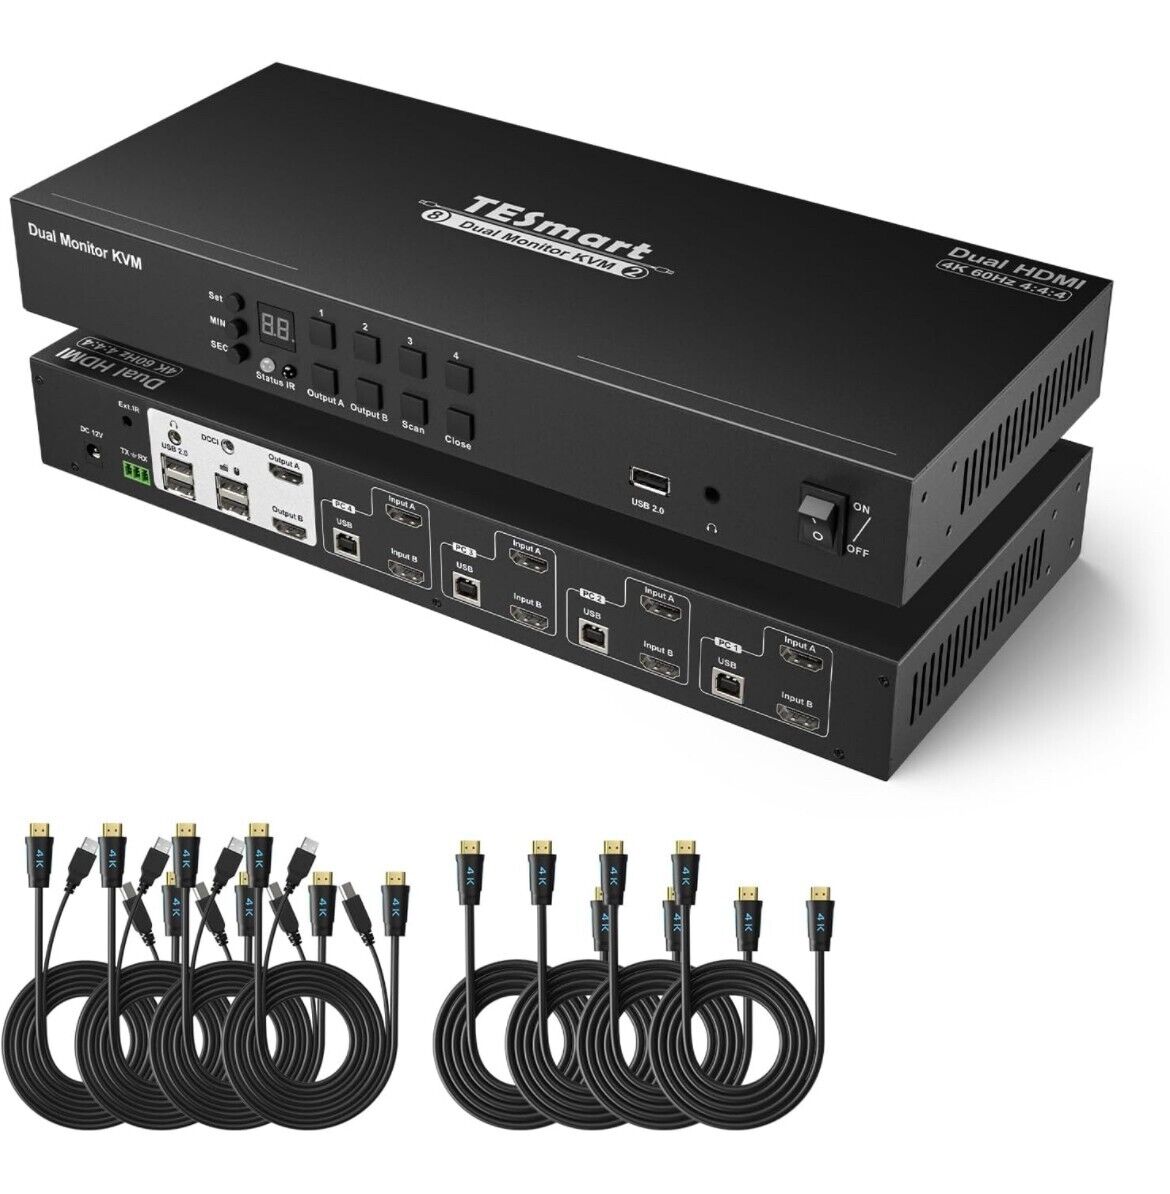 TESmart 4 Port 4K@60Hz Ultra HD 4x1 HDMI KVM Switch with 2x Cables & Remote